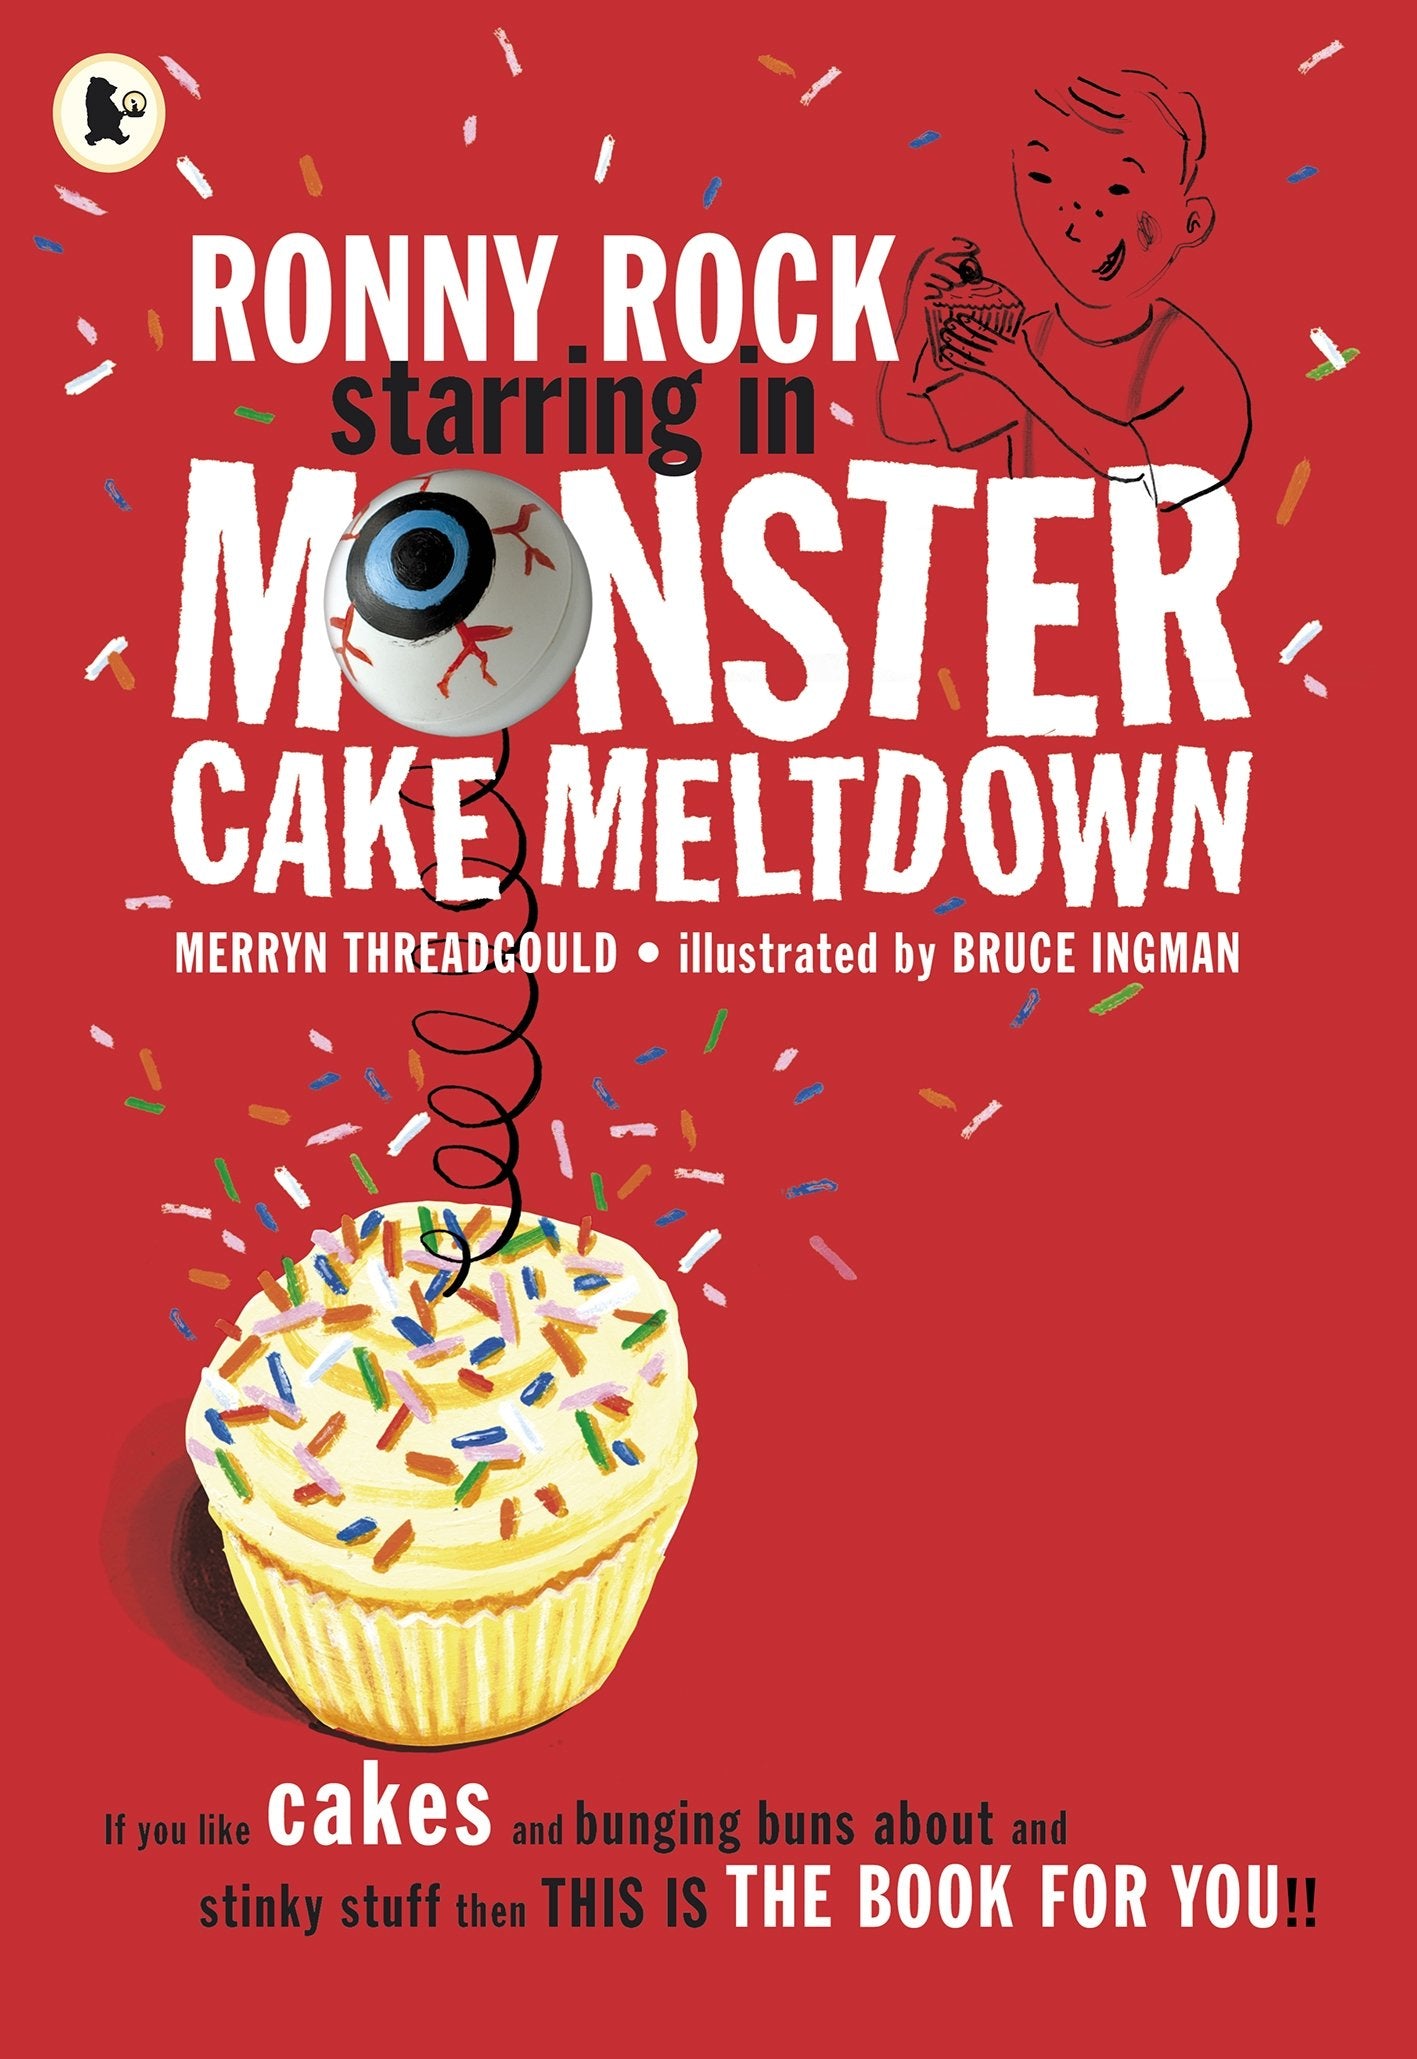 Ronny Rock Starring in Monster Cake Meltdown by Merryn Threadgould and Bruce Ingham